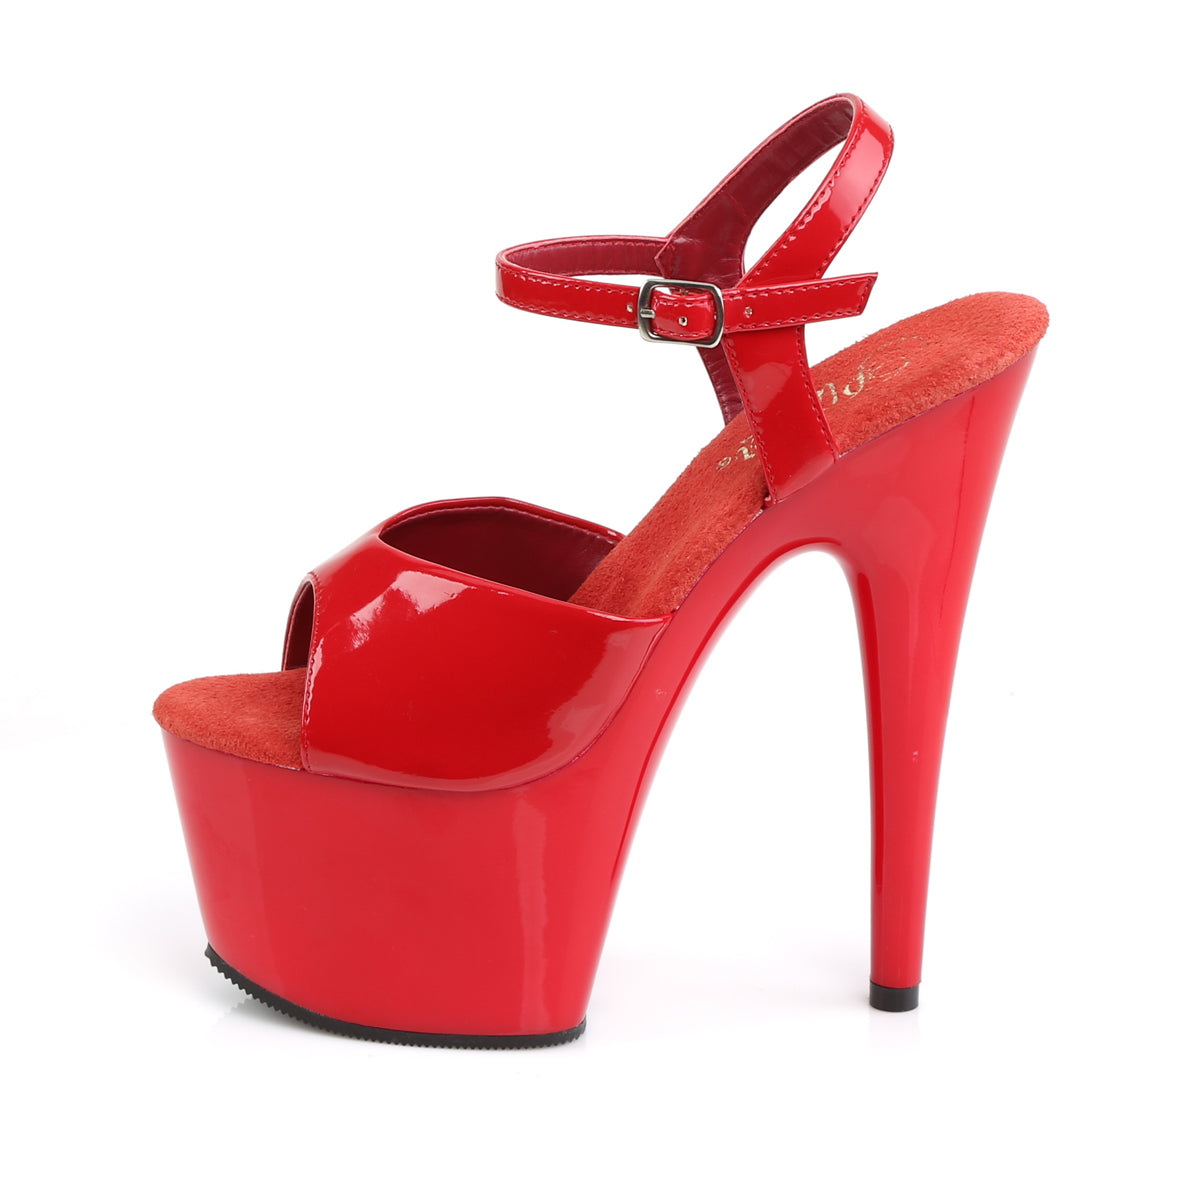 ADORE-709 Pleasers 7 Inch Heel Red Pole Dancing Platforms-Pleaser- Sexy Shoes Pole Dance Heels